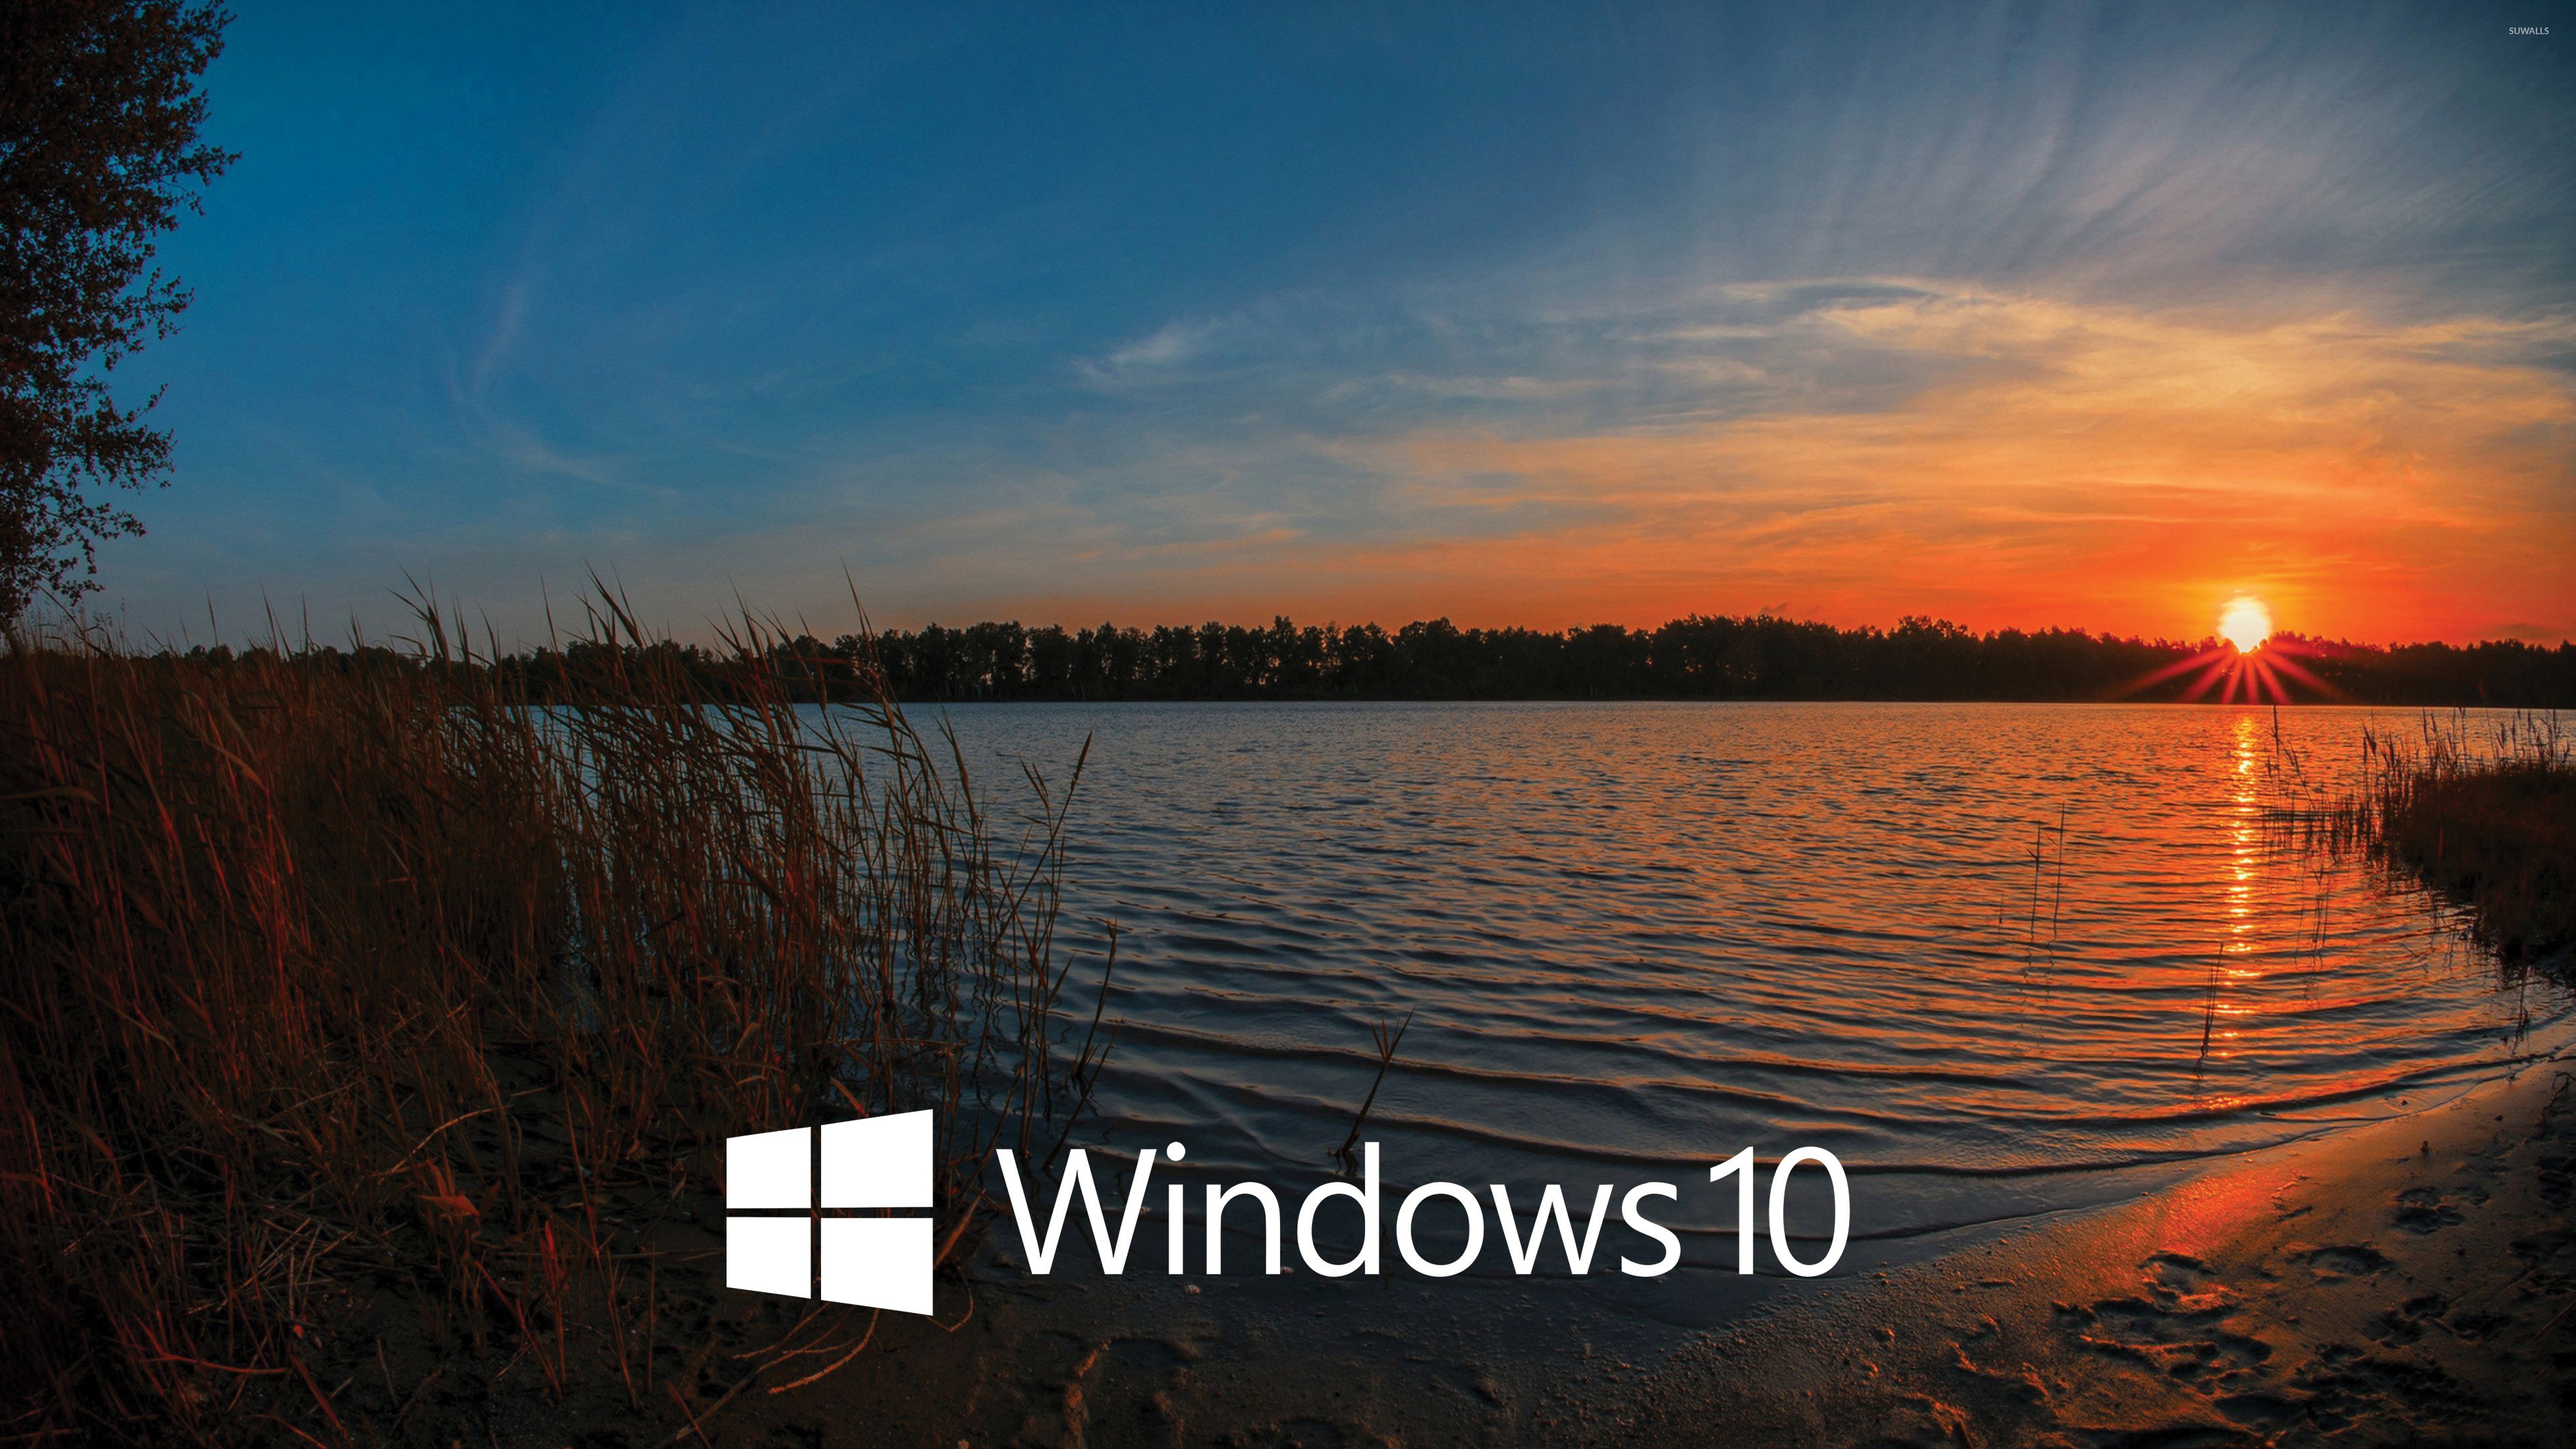 wallpaper Windows 10 ·① Download free awesome High Resolution